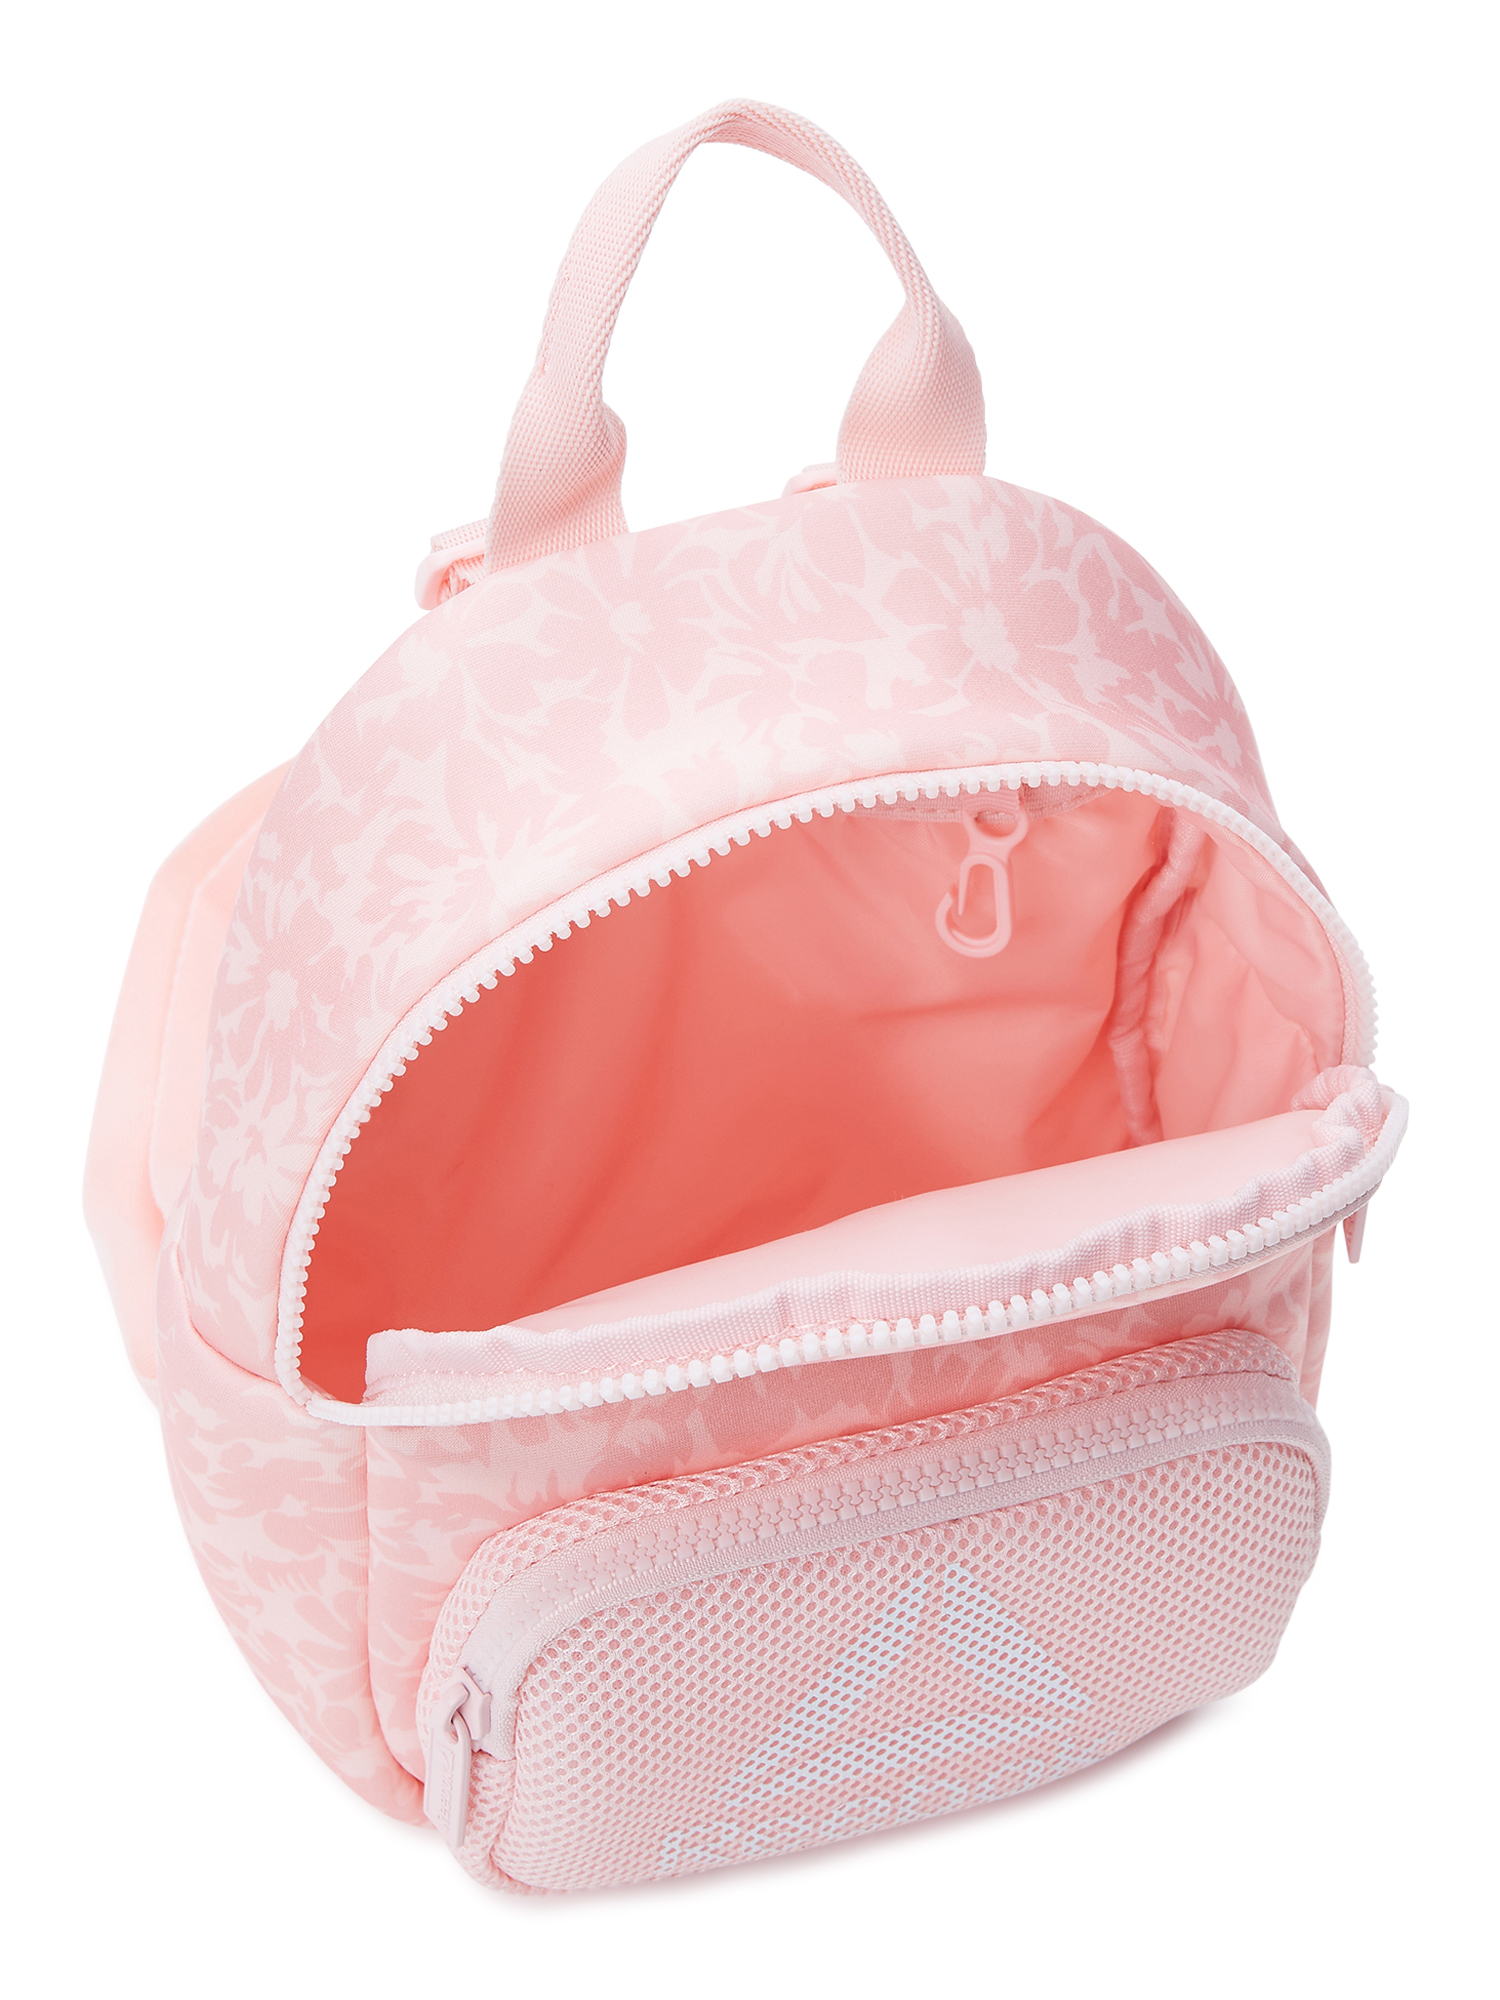 Reebok Women’s Molly Mini Backpack, Rose Daisies - image 5 of 5